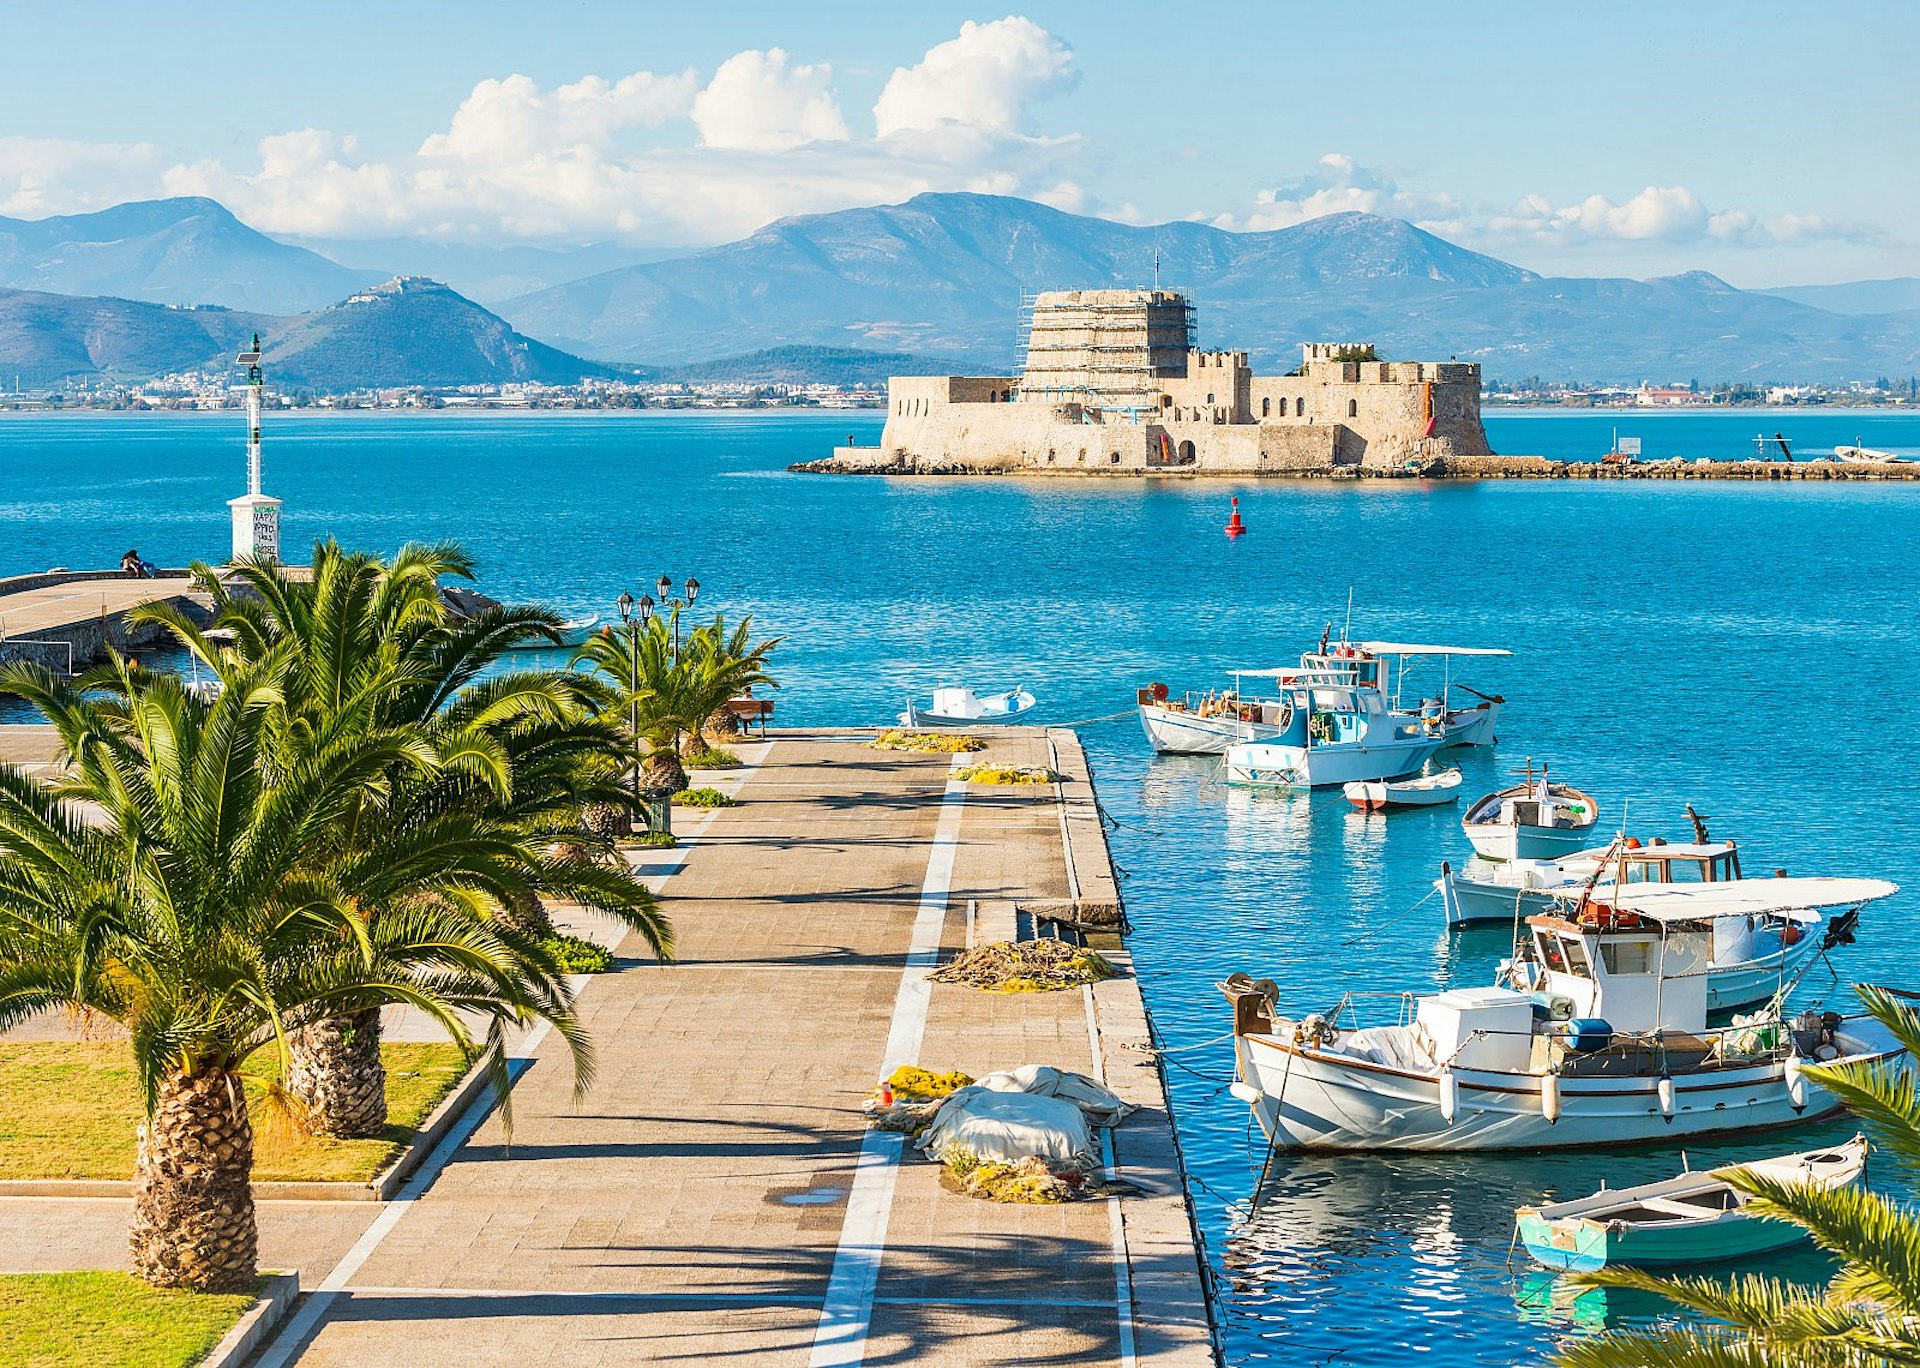 A paved jetty lined with palm trees, with boats next to it in the harbour; beyond is a fortress on an islet, with mountains on the coastline further away still.